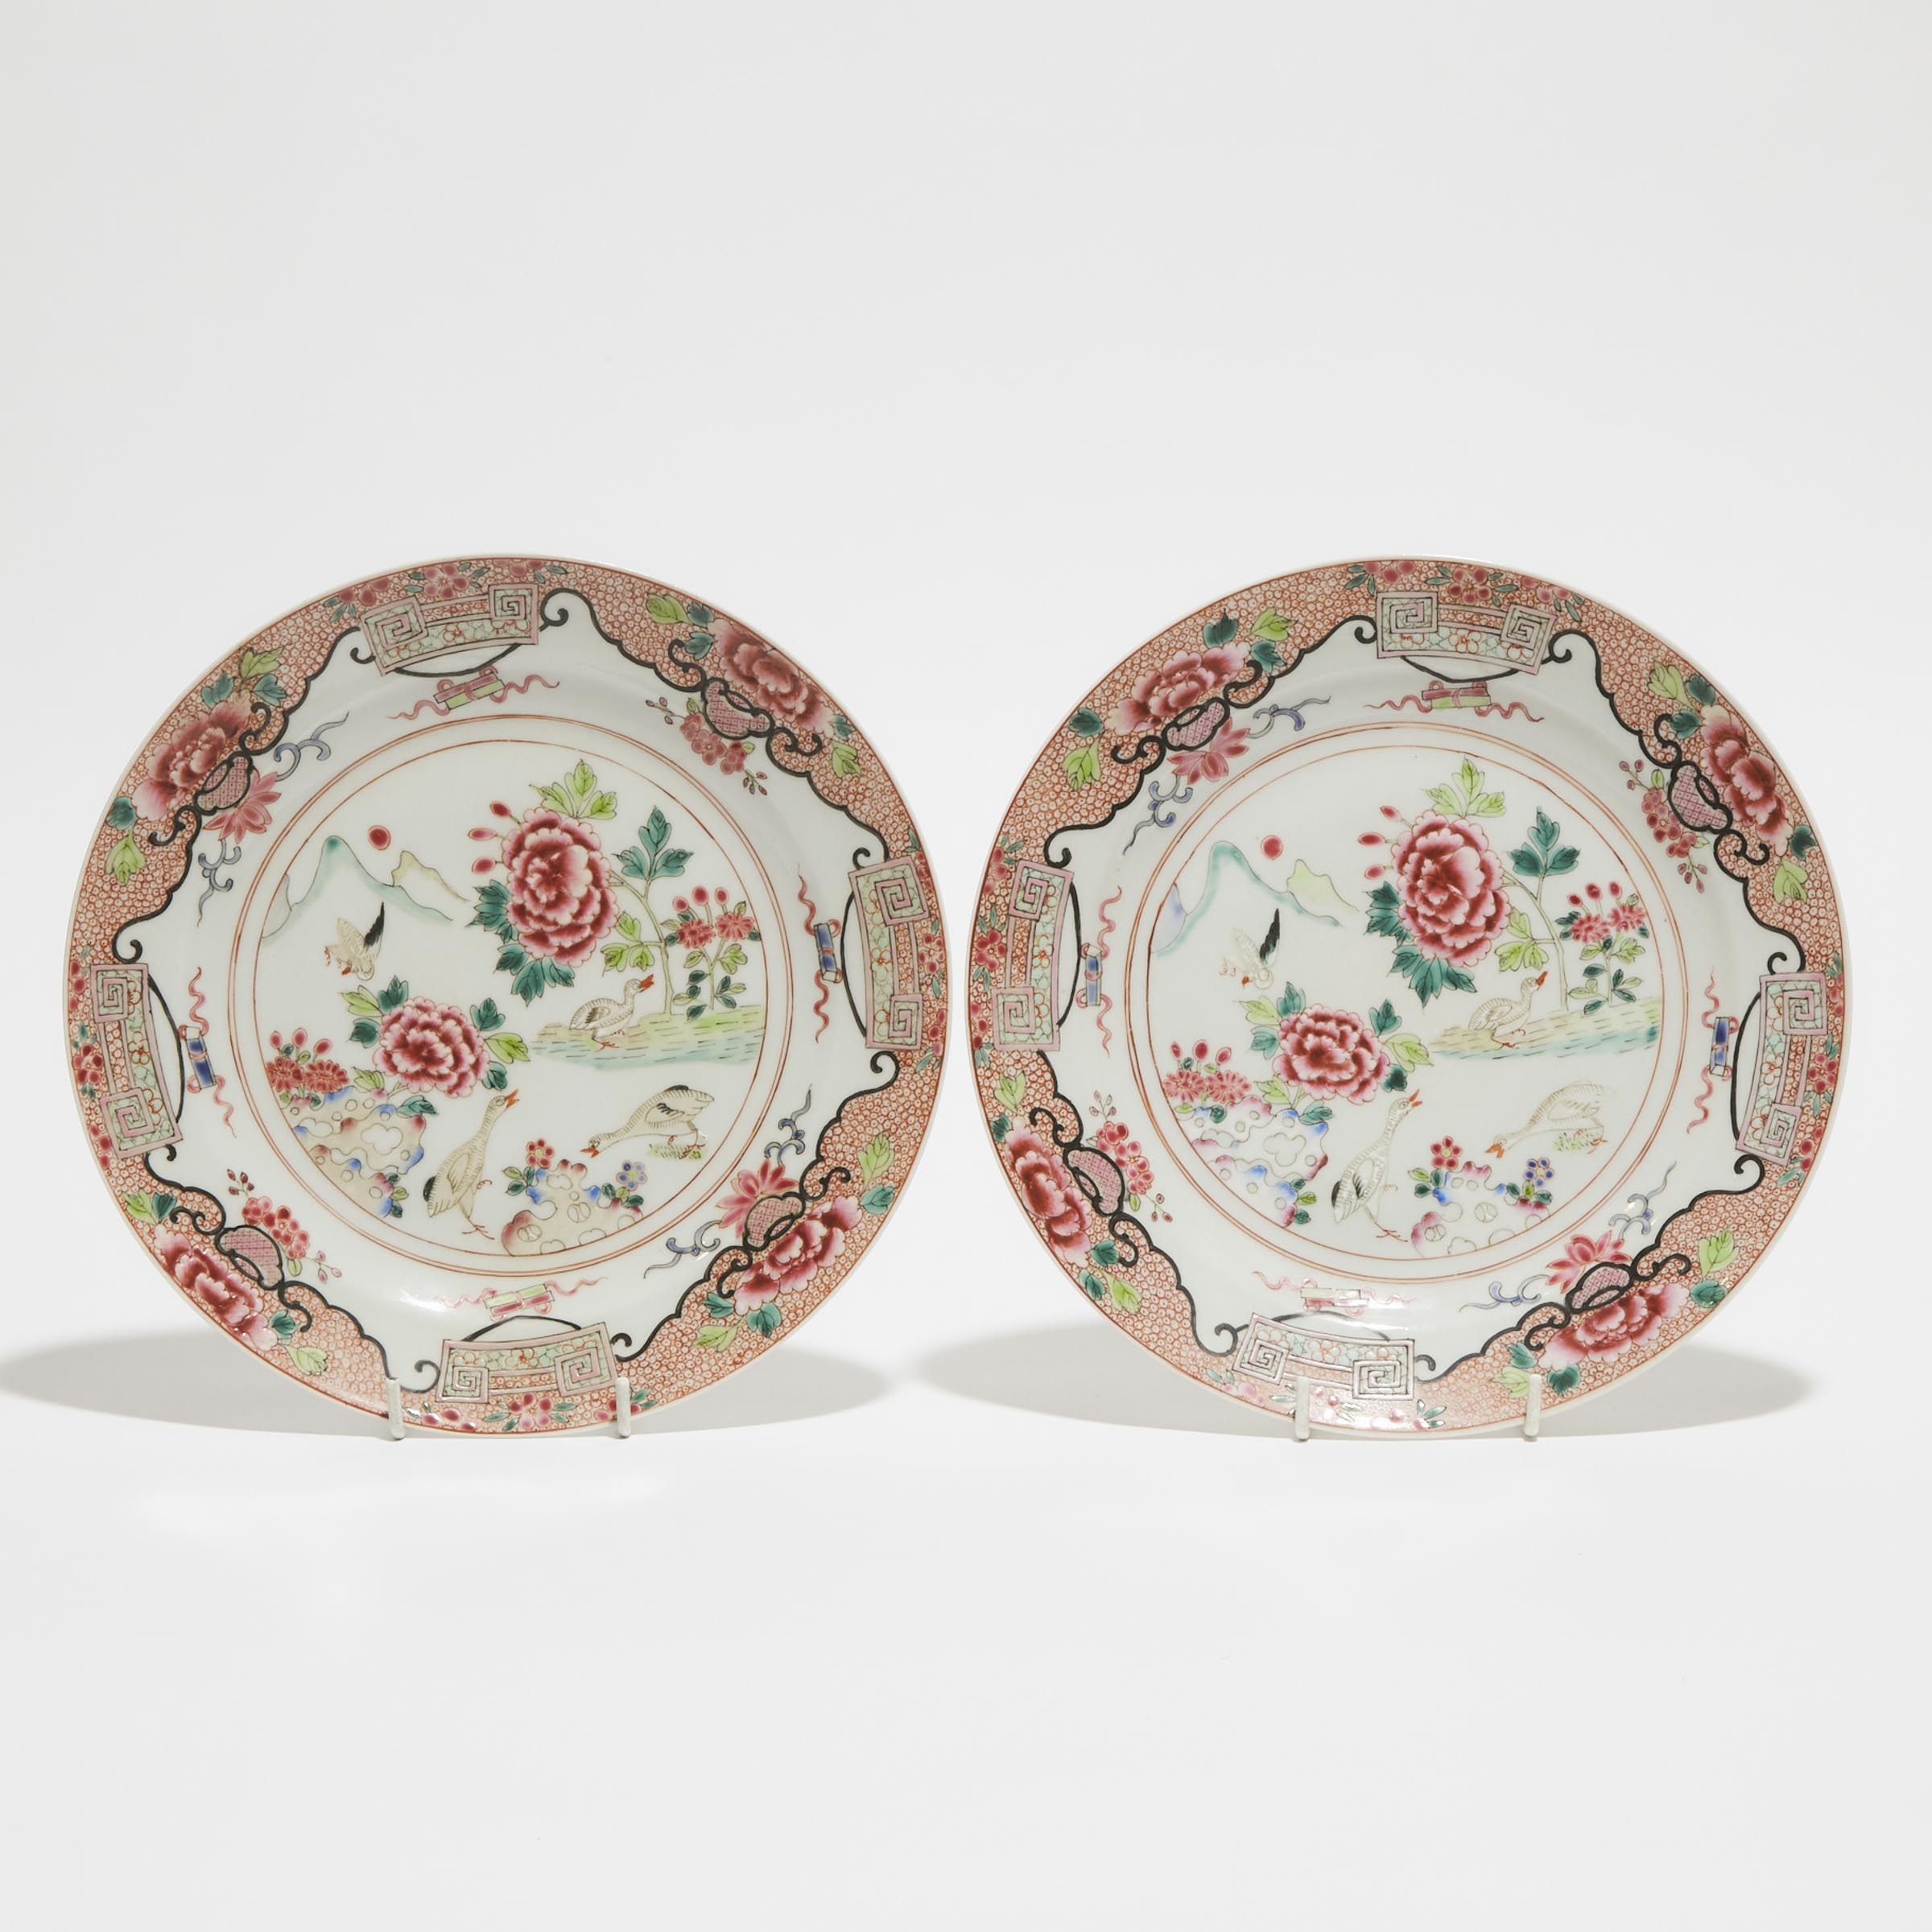 A Pair of Famille Rose 'Duck' Plates, Qianlong Period, 18th Century